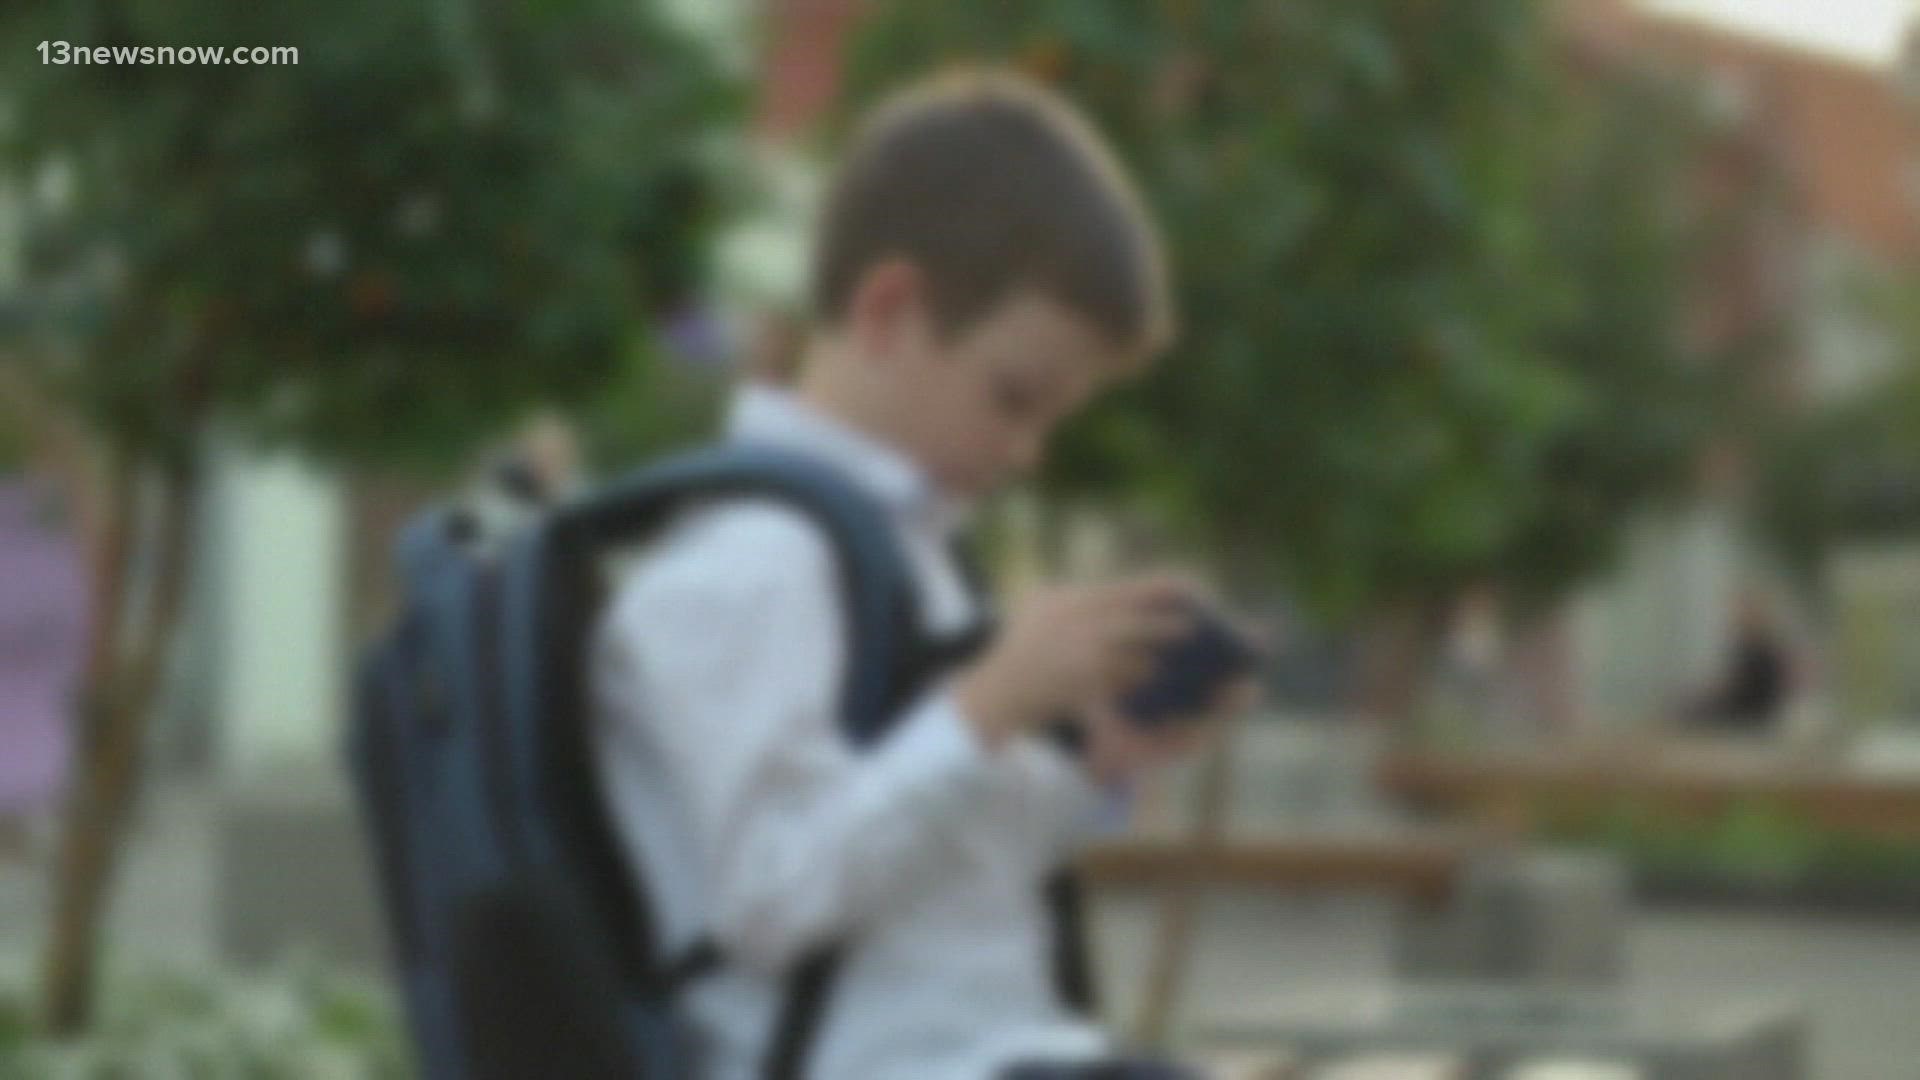 The school phone ban could soon become law in one state.